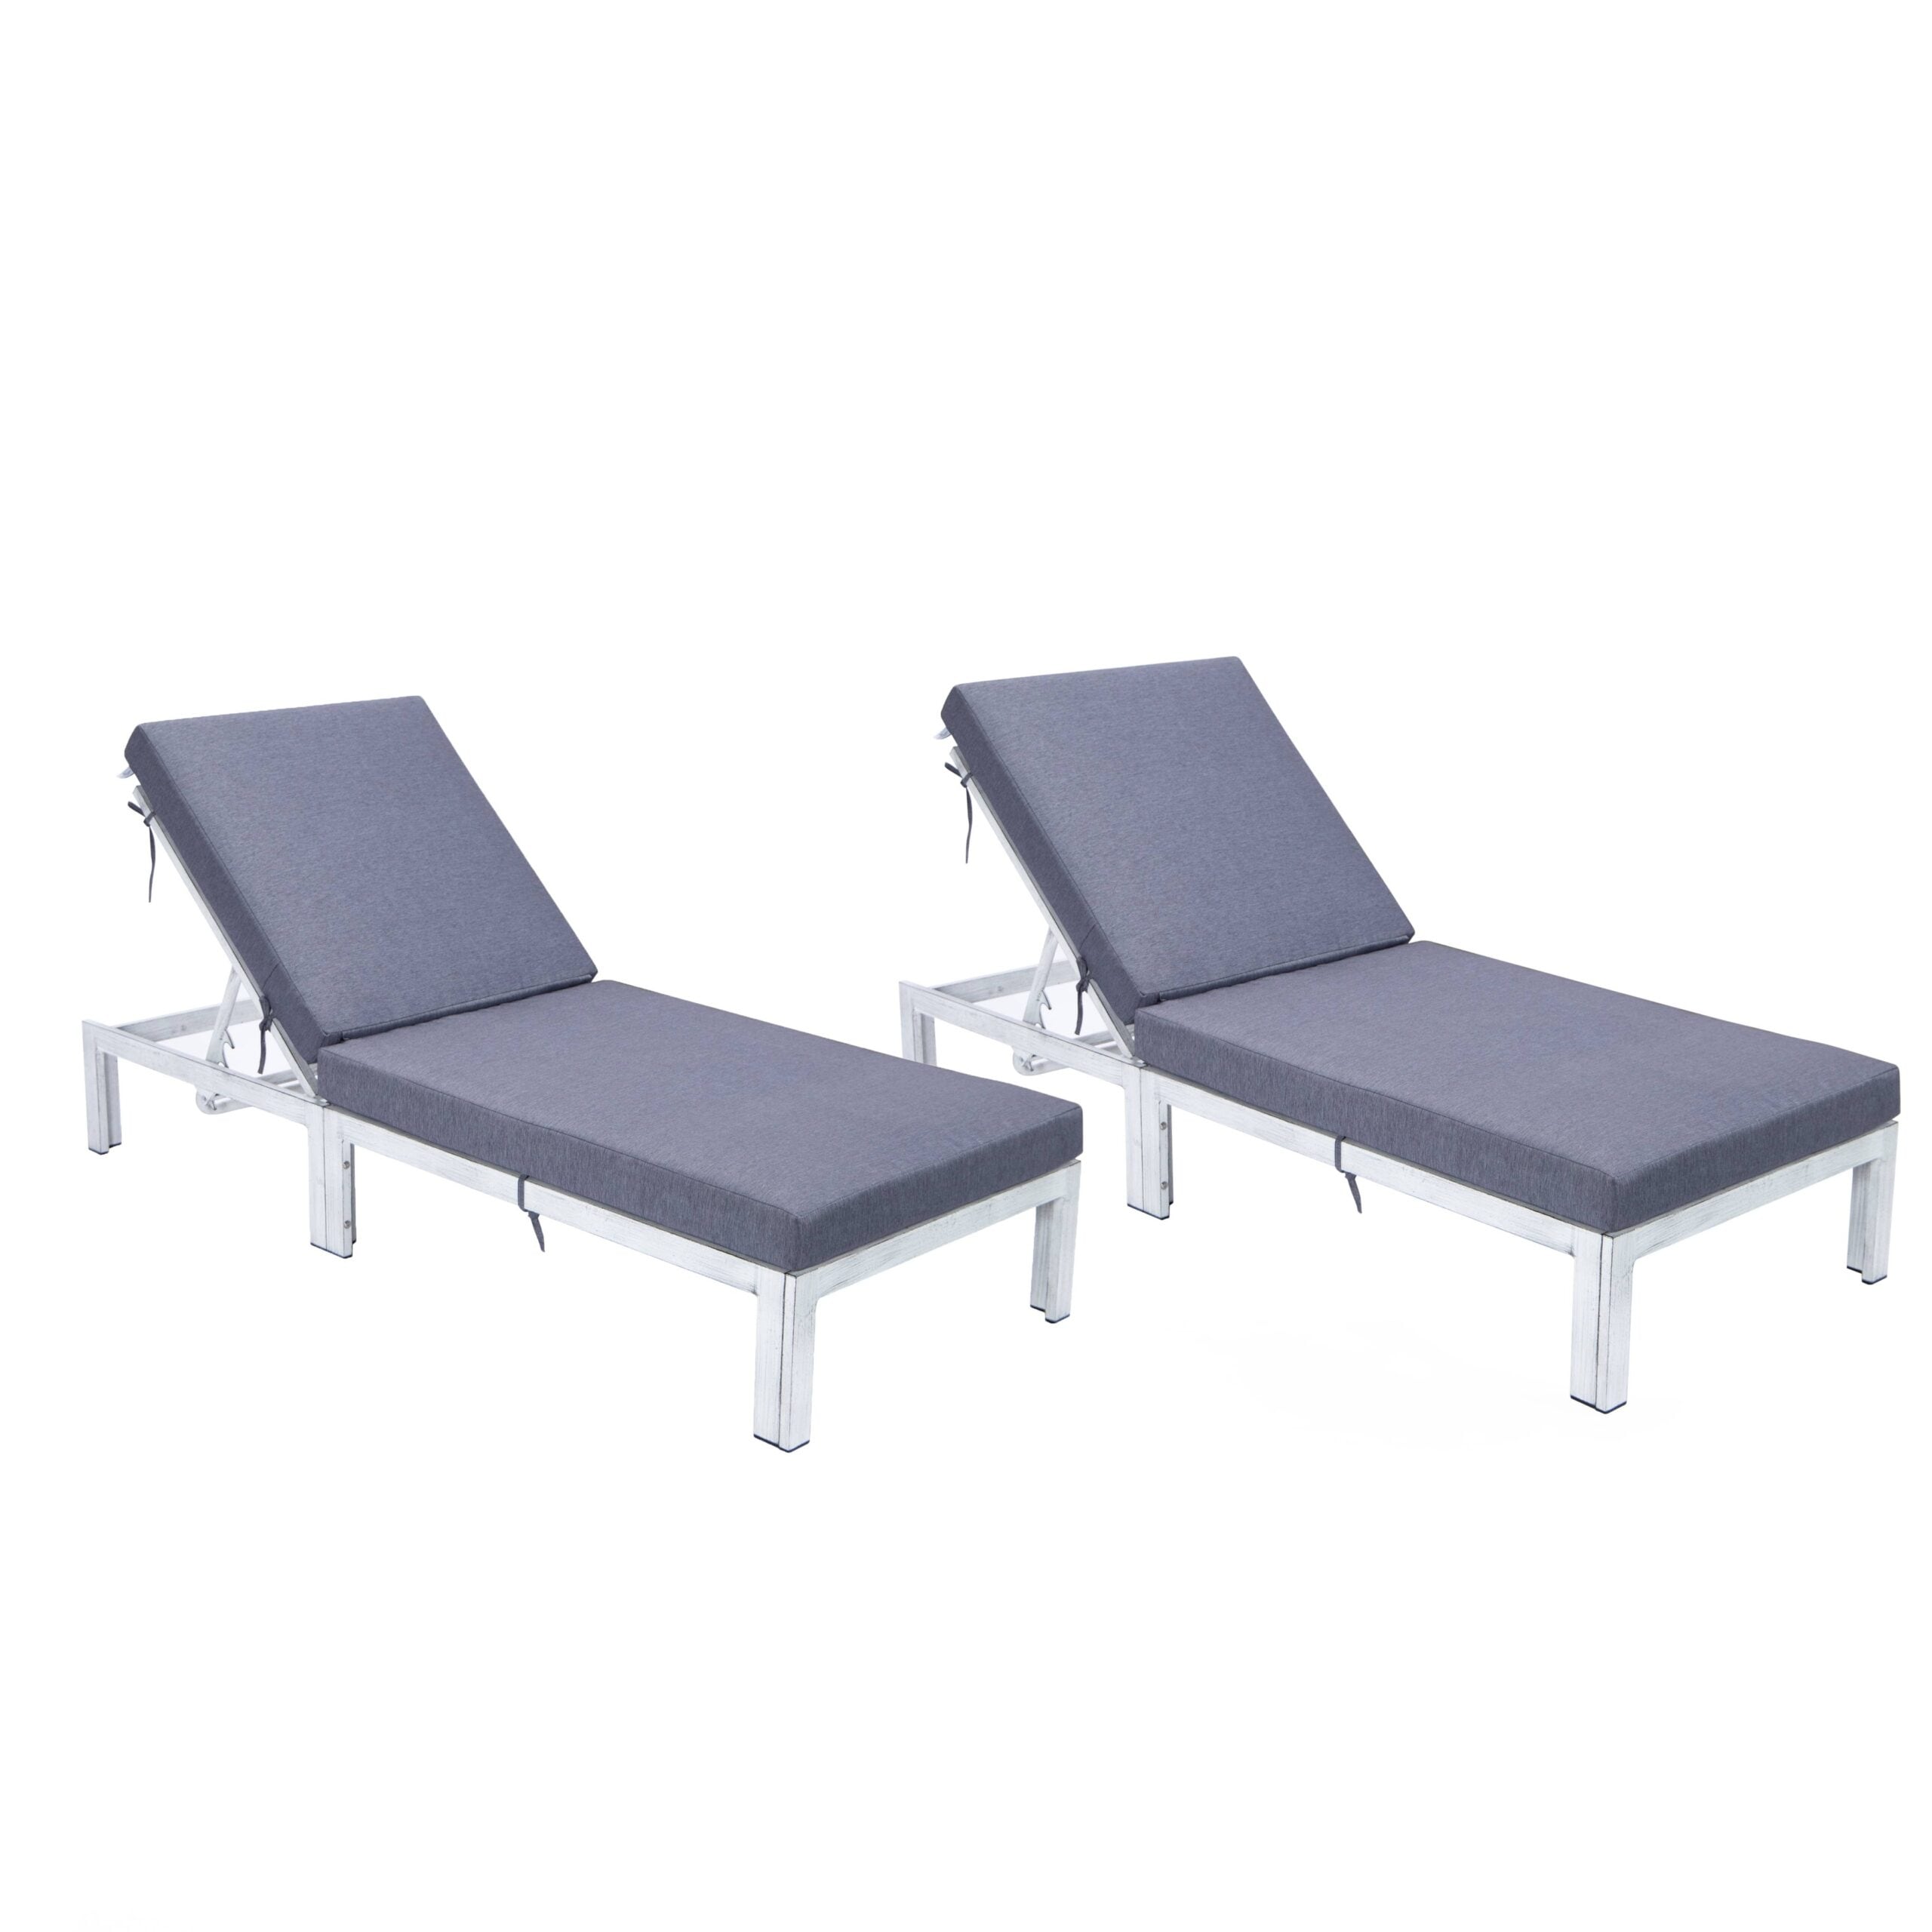 Leisuremod Chelsea Grey Chaise Lounge Chair With Cushions Set Of 2